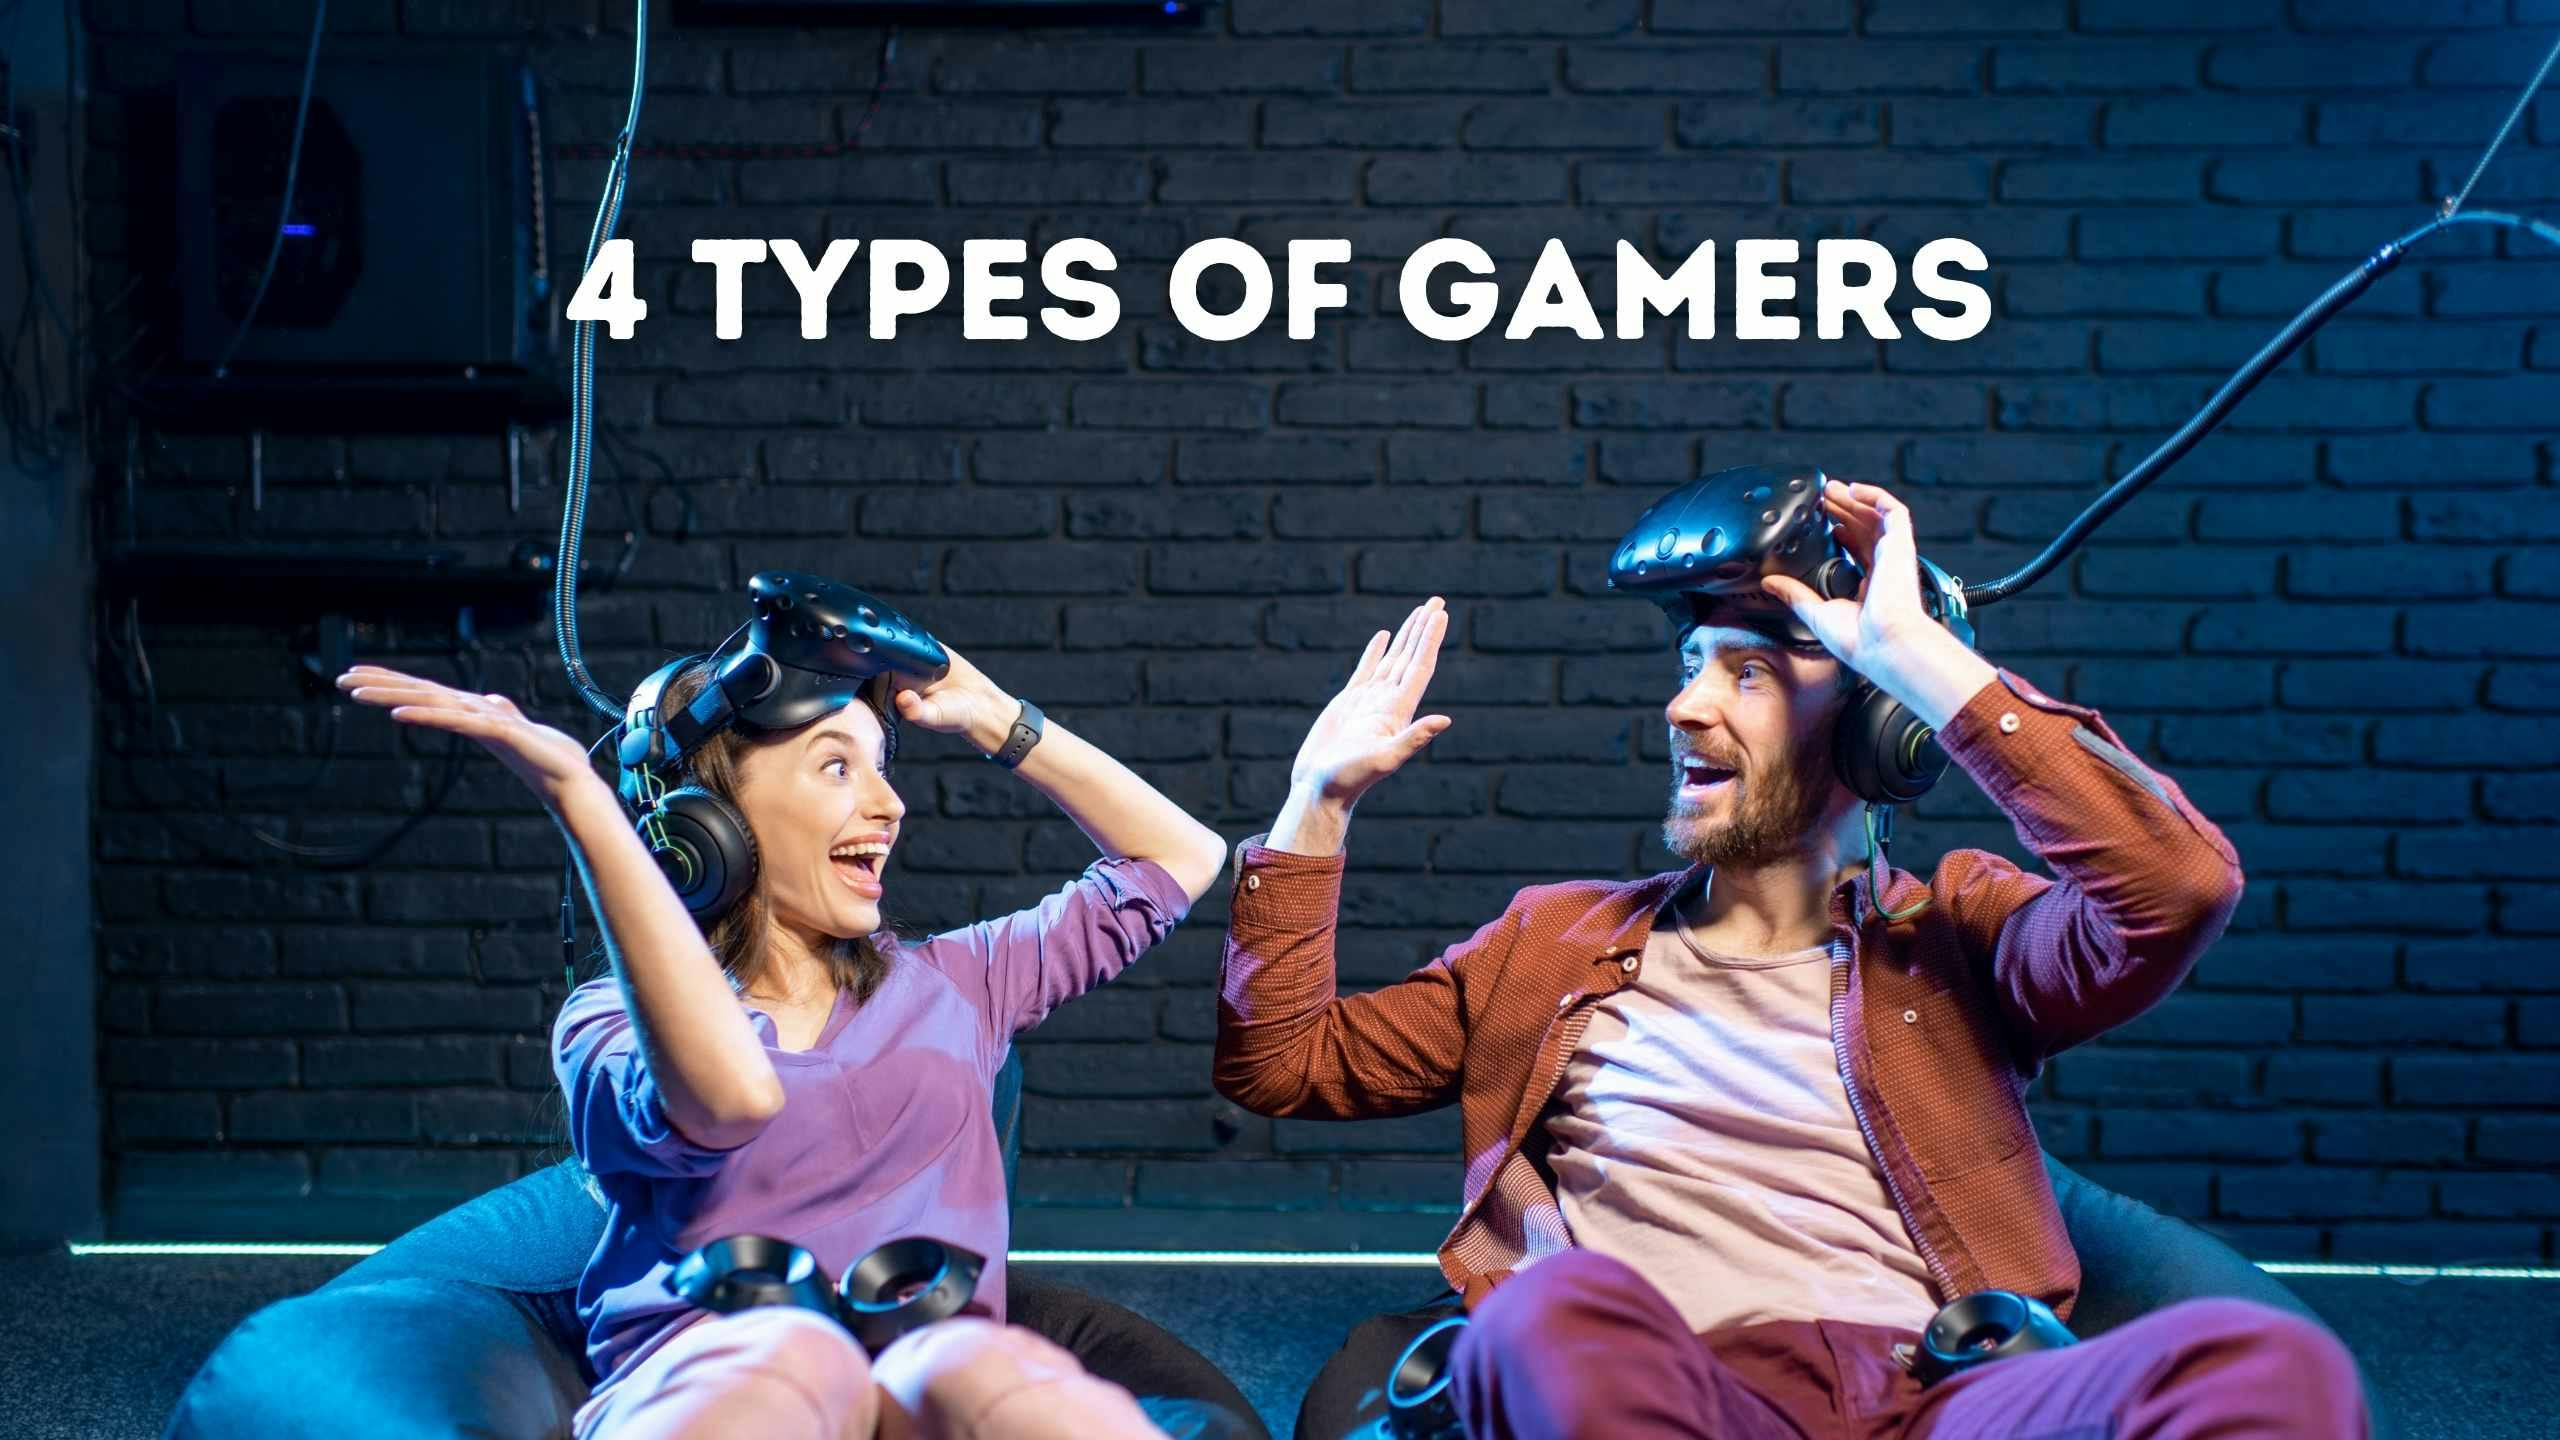 The 4 Types of Gamers